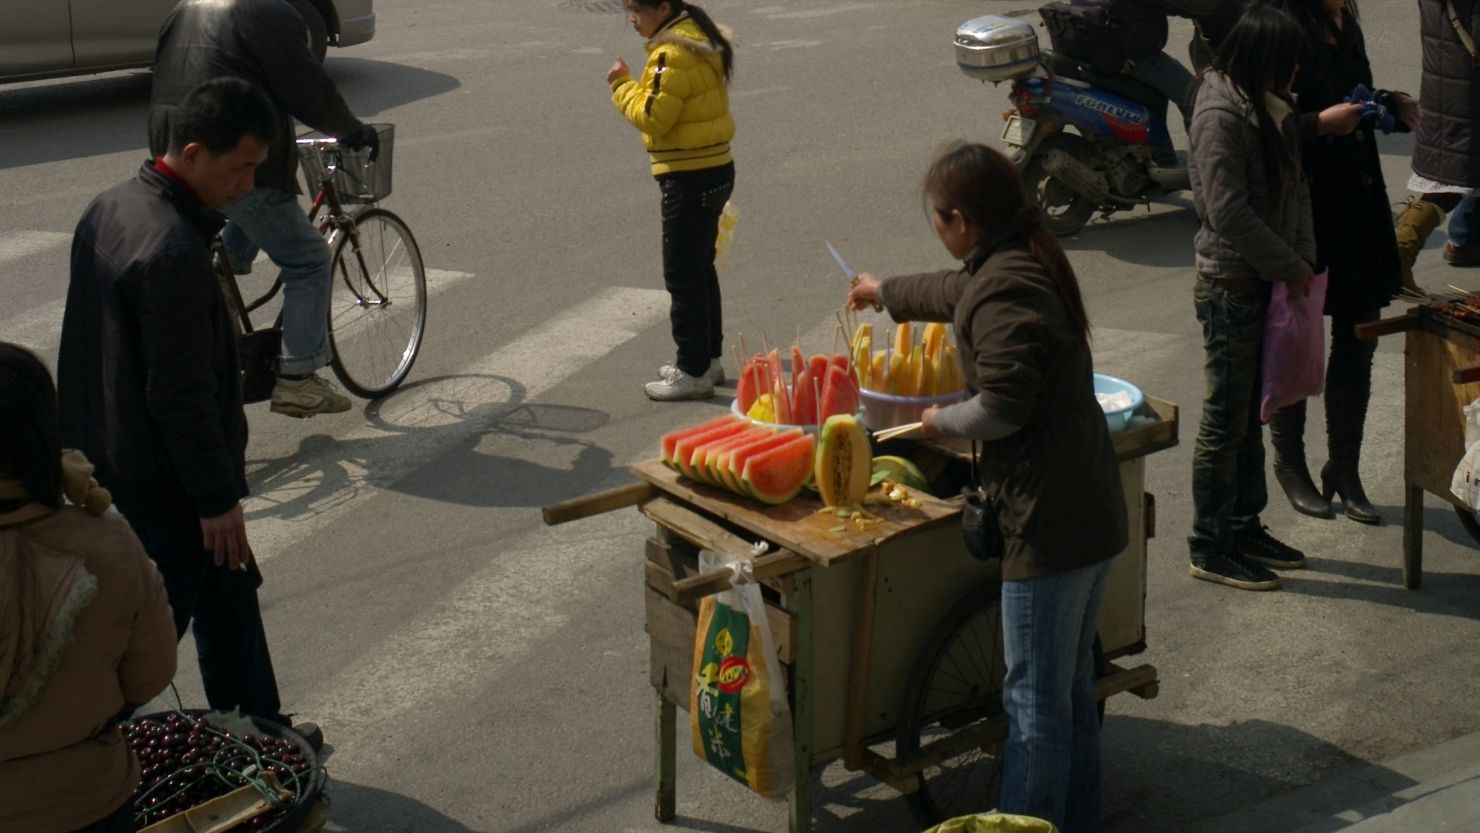 The Human Rights Watch reports says street vendors have been typical victims of abuse.